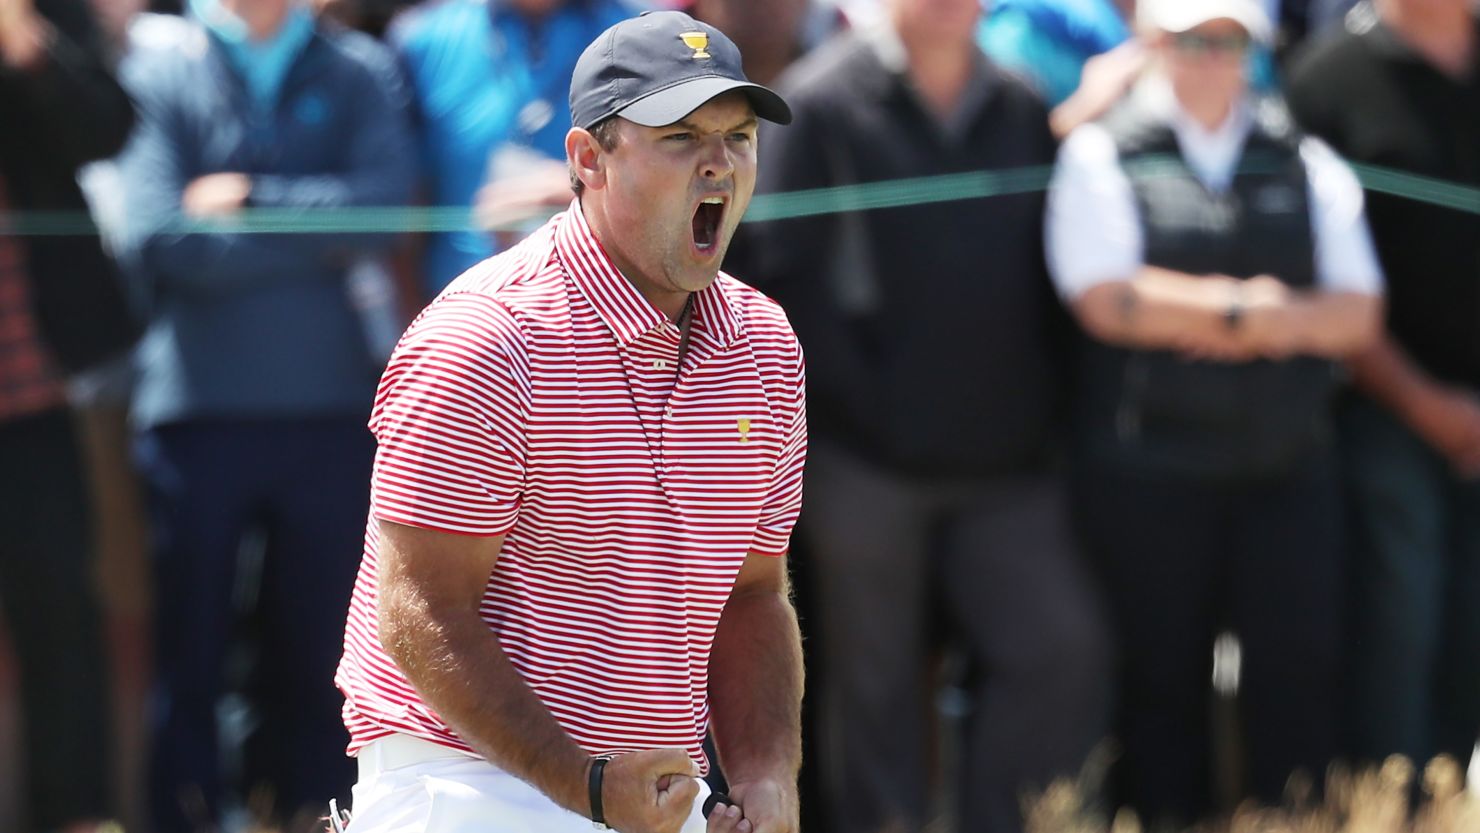 Patrick Reed celebrates during December's Presidents Cup in Australia.